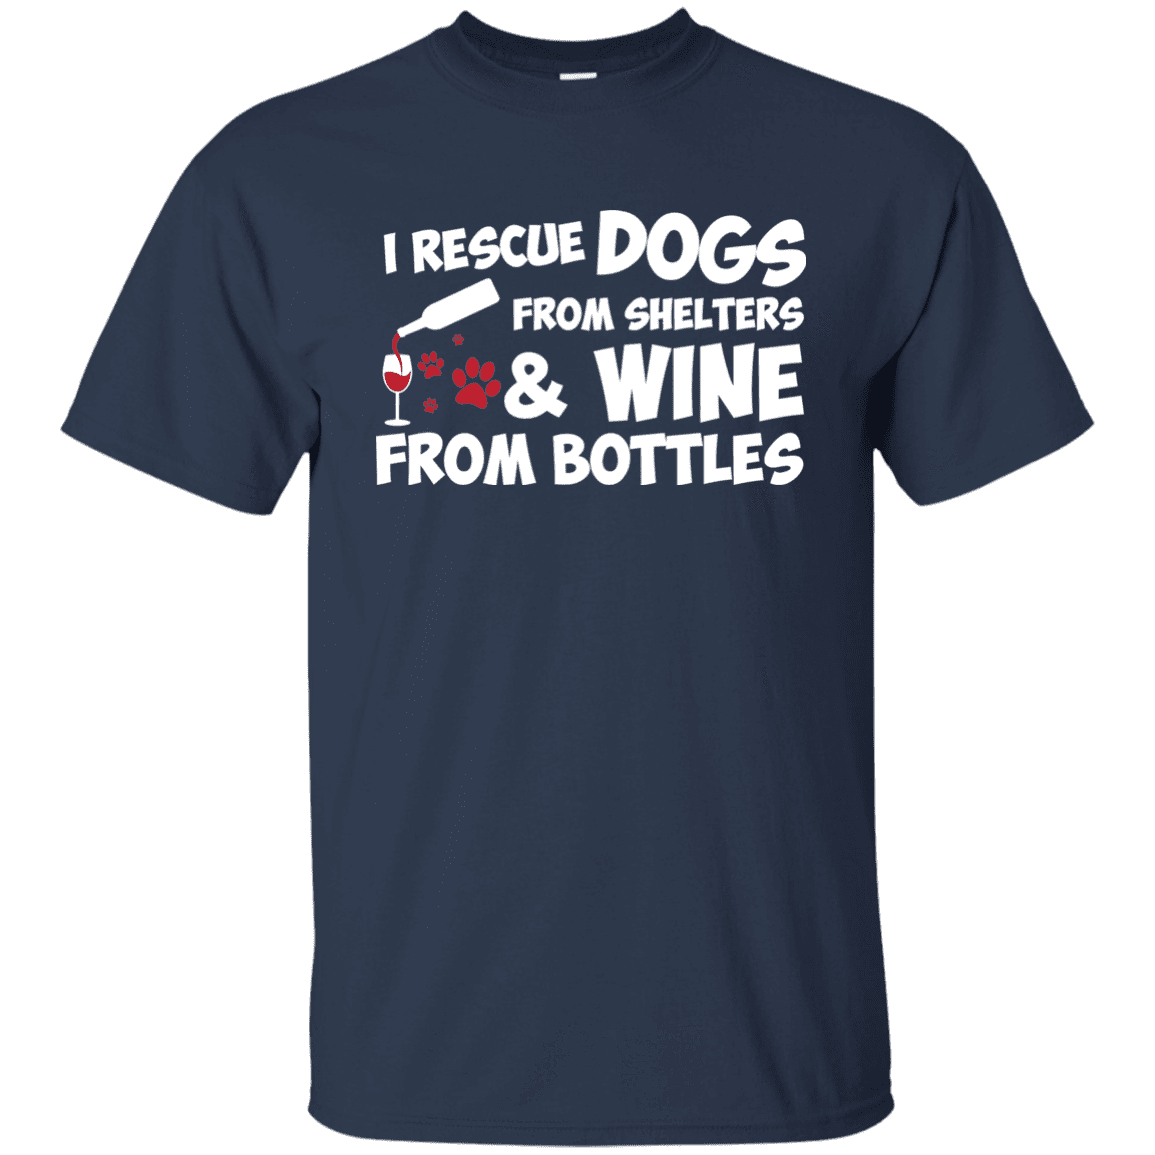 I Rescue Dogs And Wine - T Shirt.